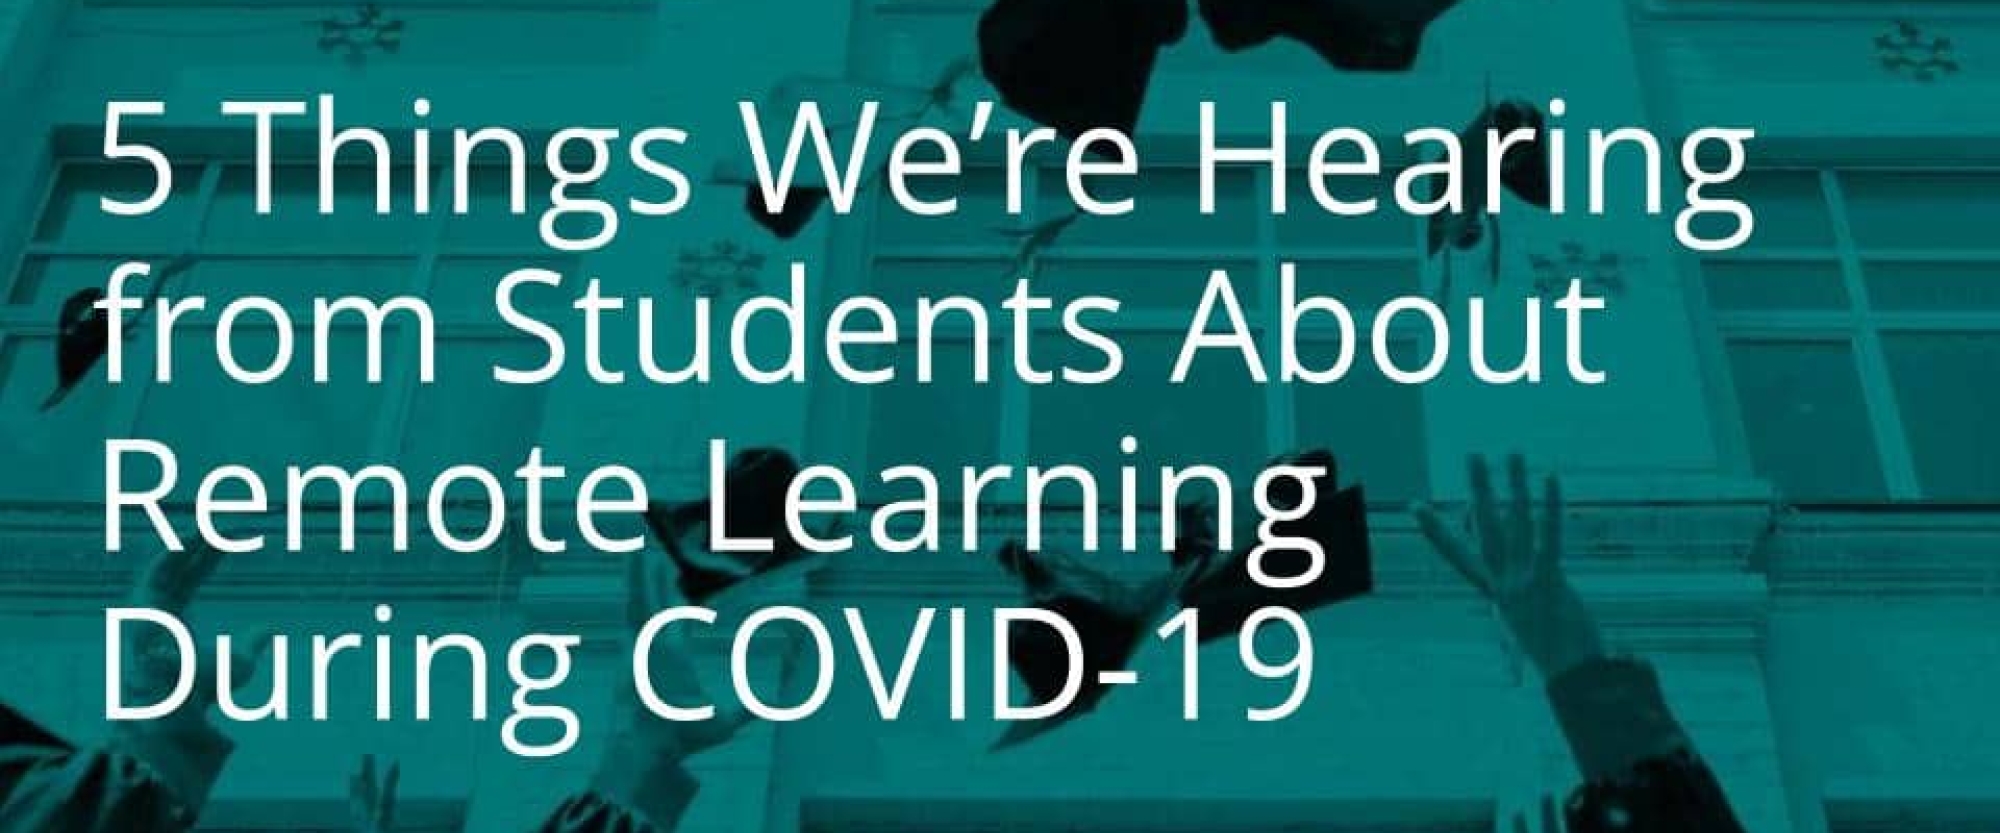 5 Things We’re Hearing from Students About Remote Learning During COVID-19